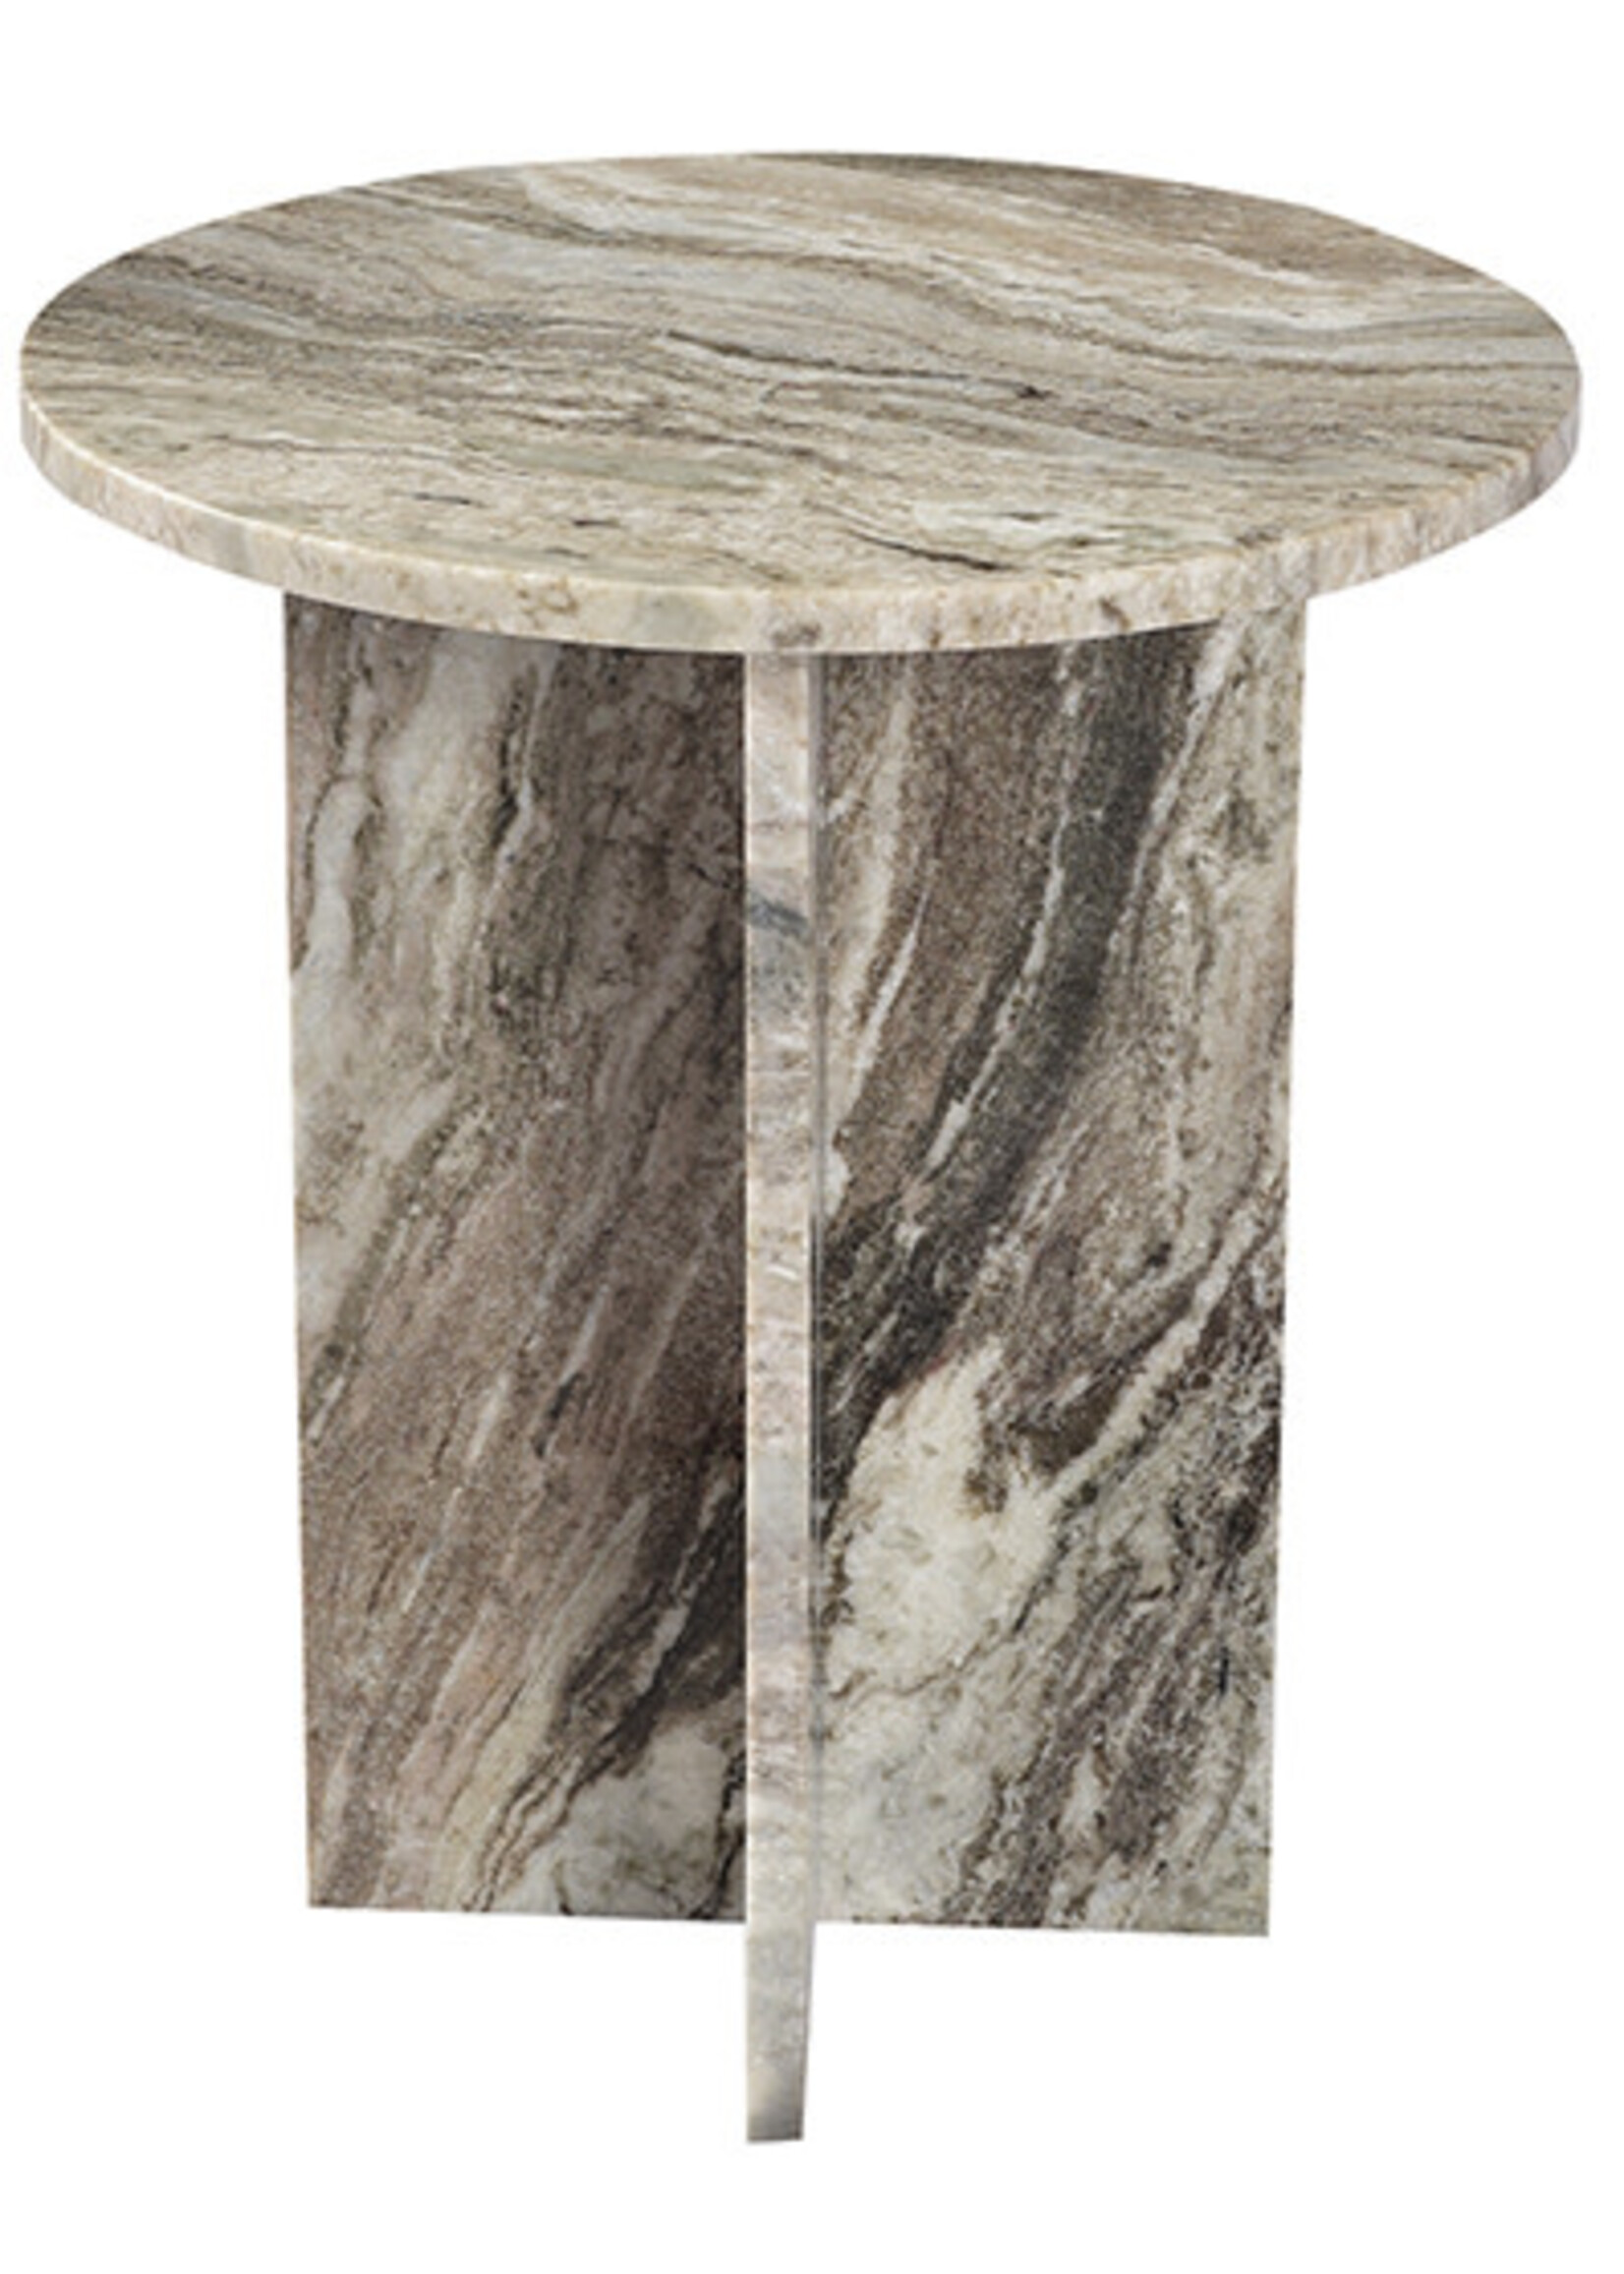 Peter Side Table - 18"